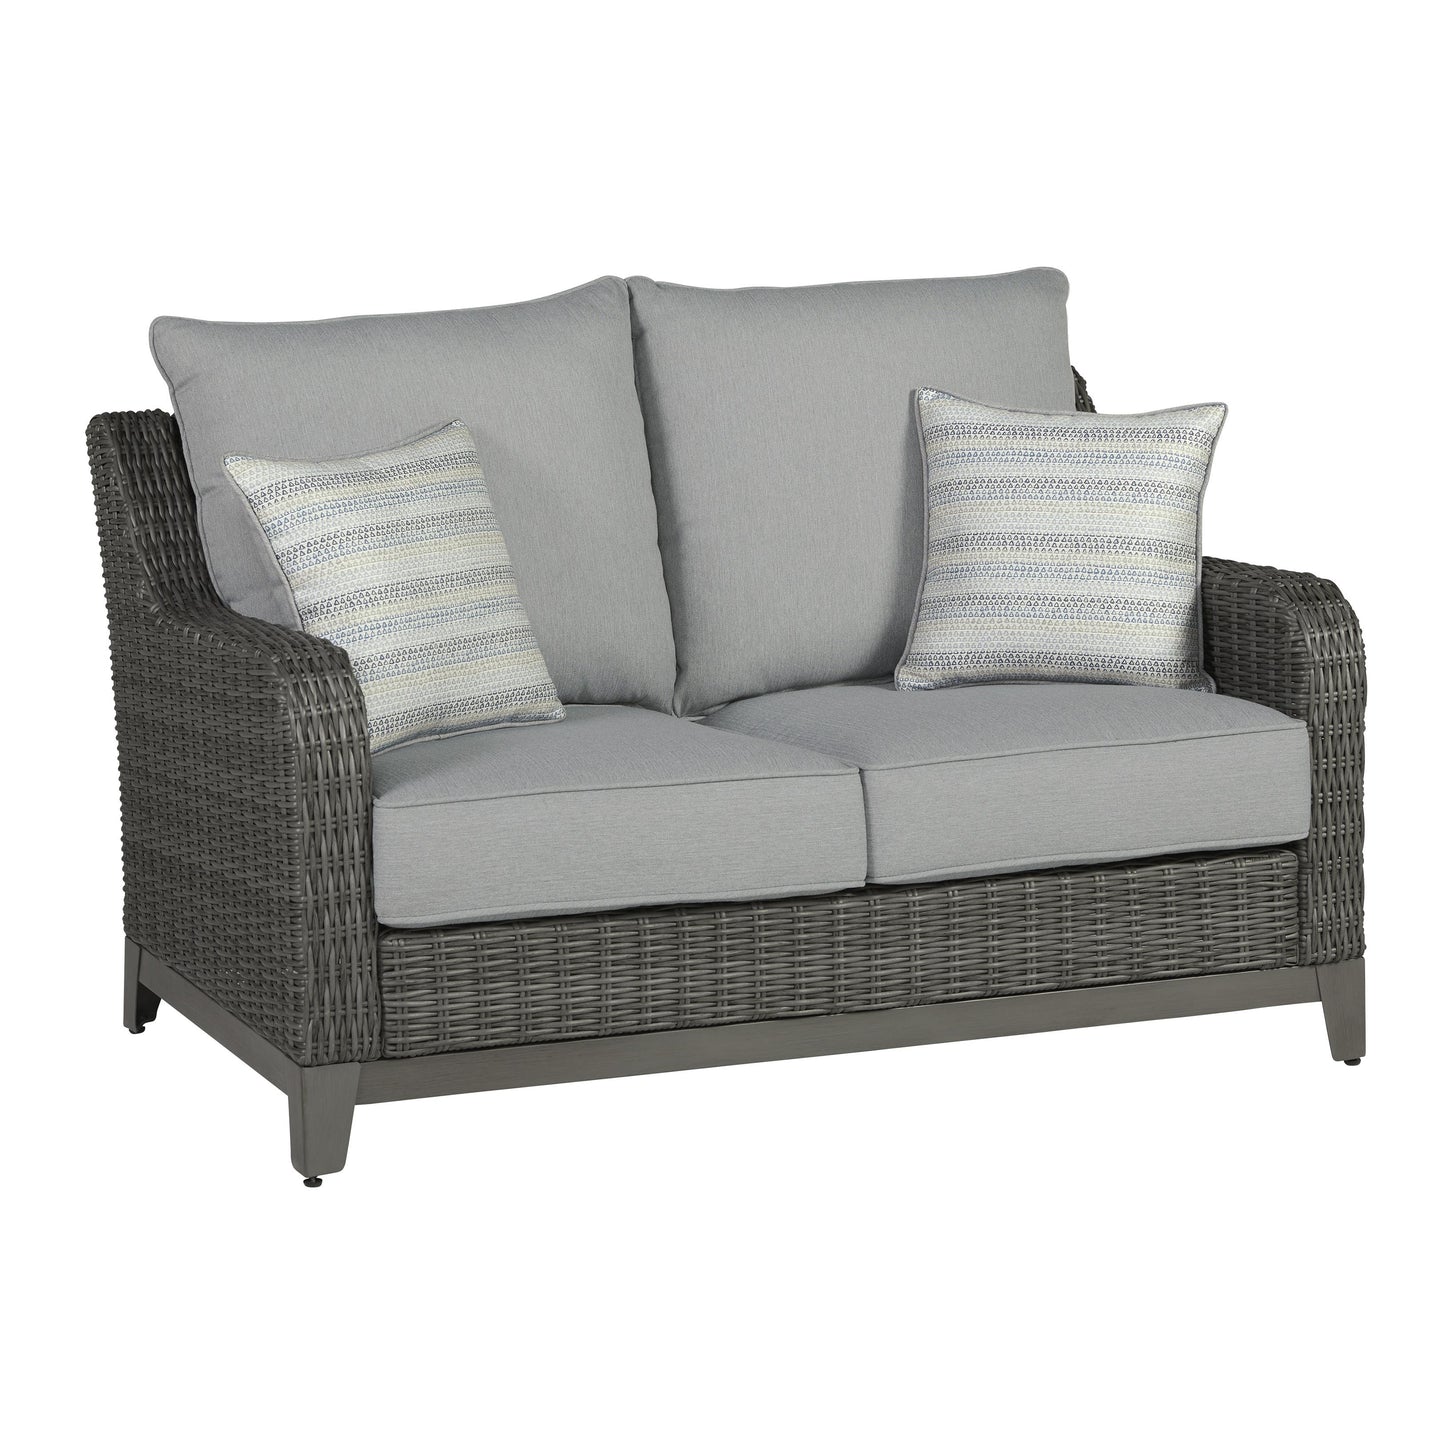 Signature Design by Ashley Outdoor Seating Loveseats P518-835 IMAGE 1